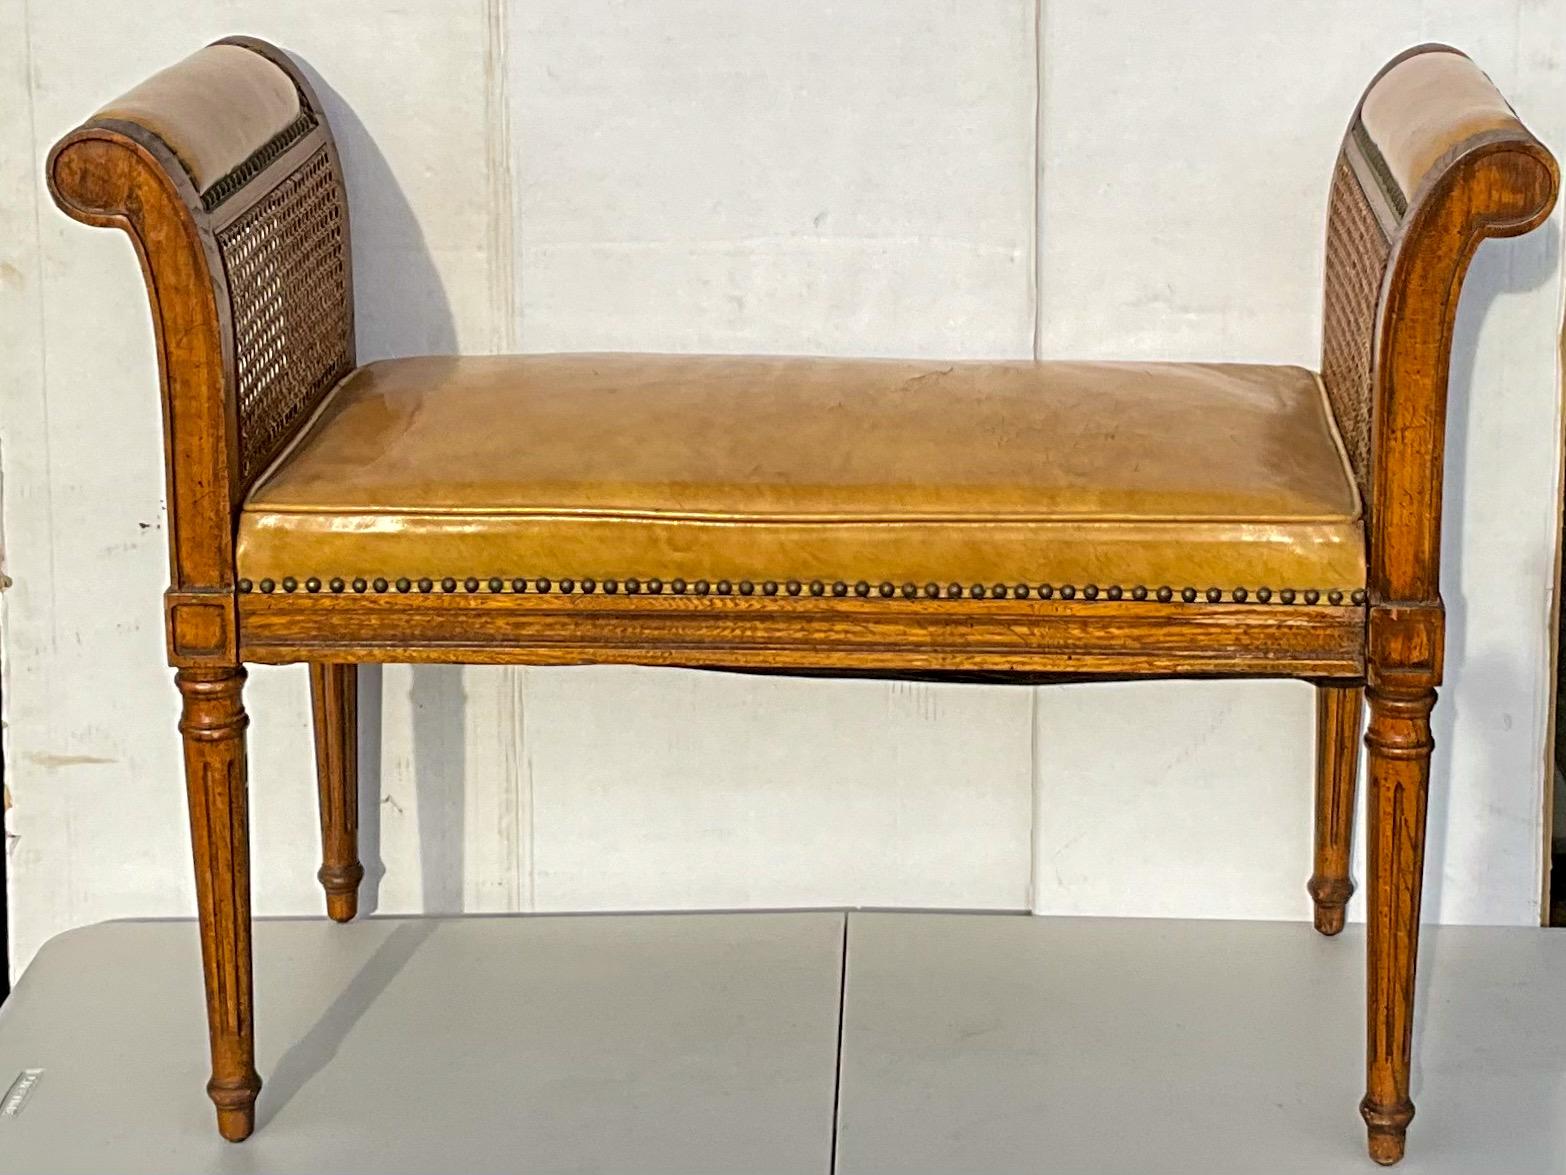 This is a handsome Italian walnut and leather bench with French styling. It has caning on both supports with leather arm rests. Brass nailheads complete the look. The gold leather shows some age wear but does not detract from the beauty. It is